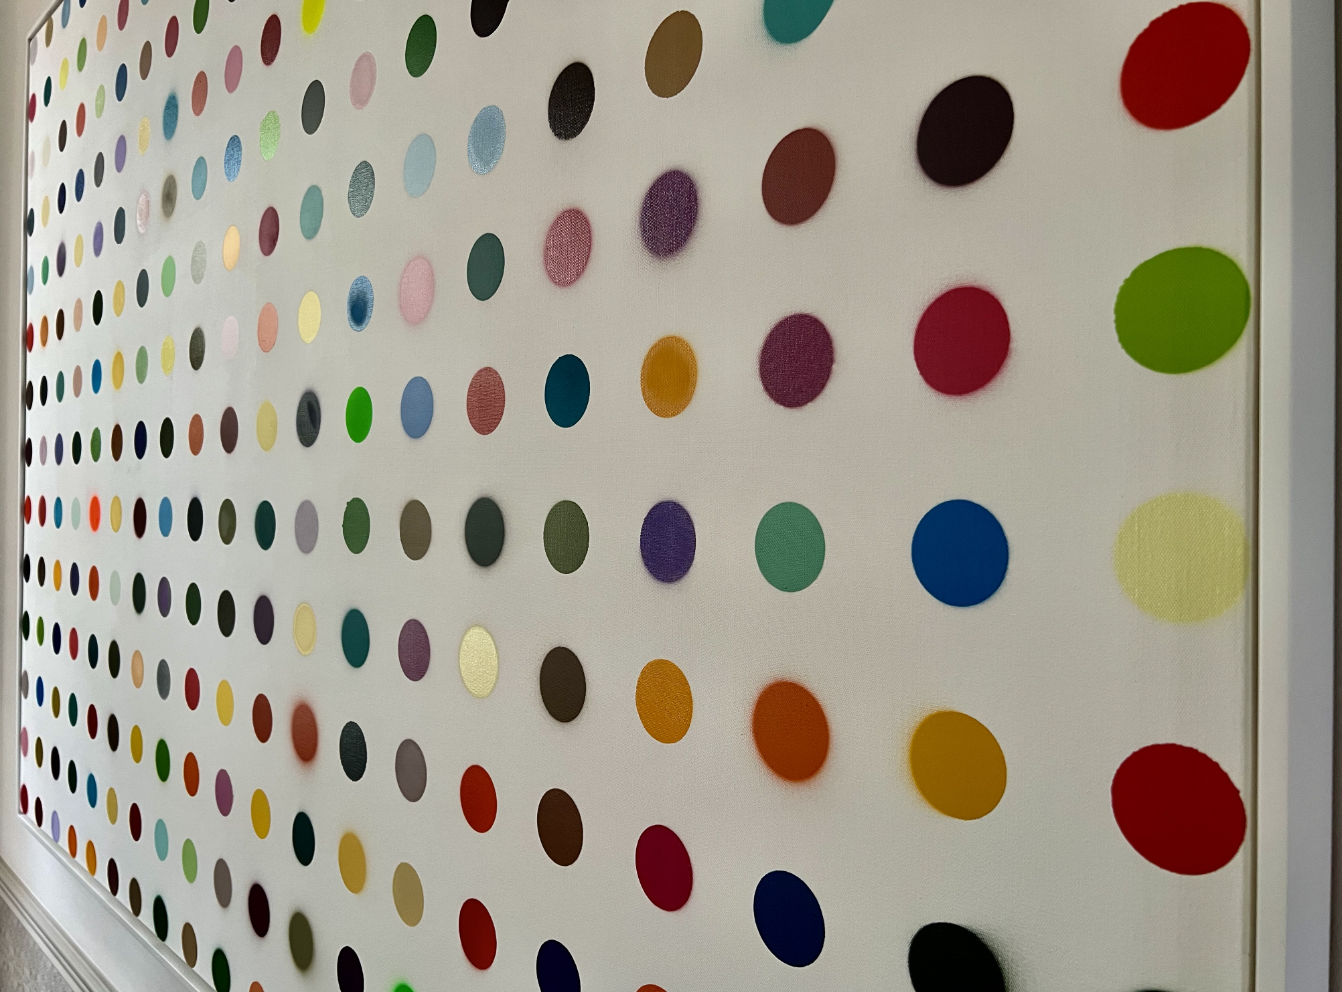 Damien Hirst in the Hollingworth Collection. Courtesy the artist and the Hollingworth Collection.